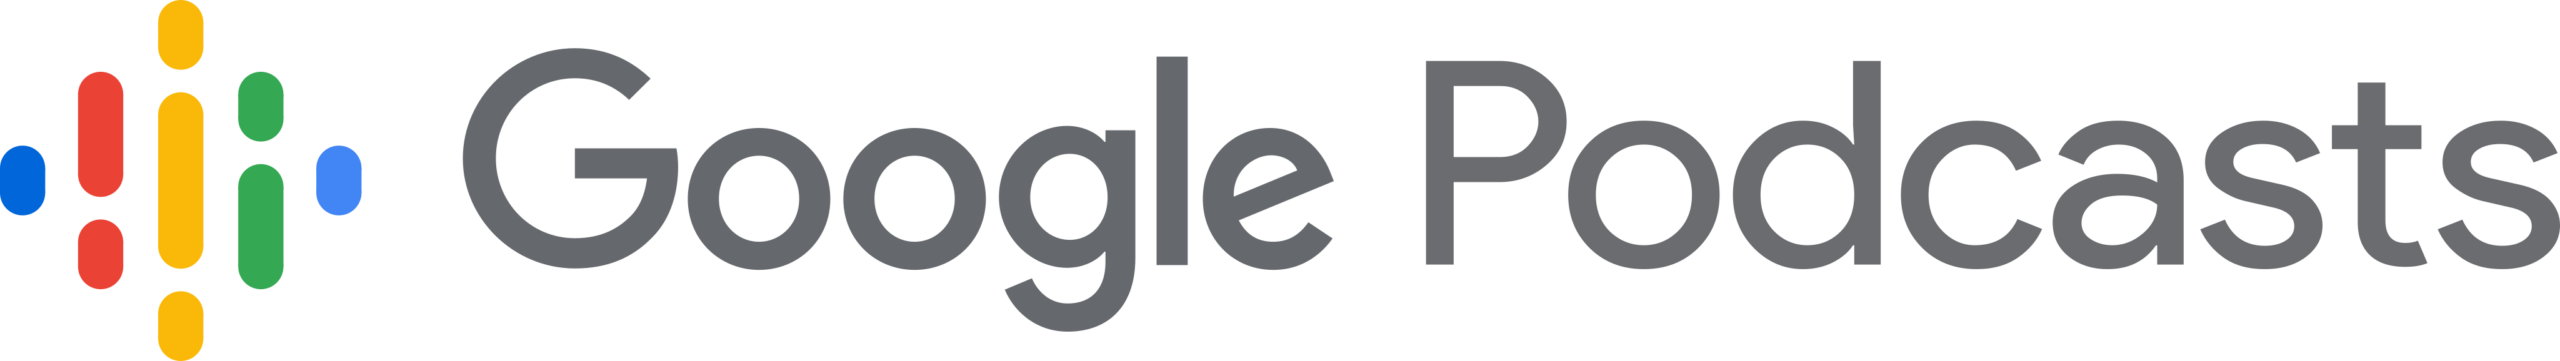 Google Podcasts logo for Non-Profit Stories Silicon Valley's Search for Assistance